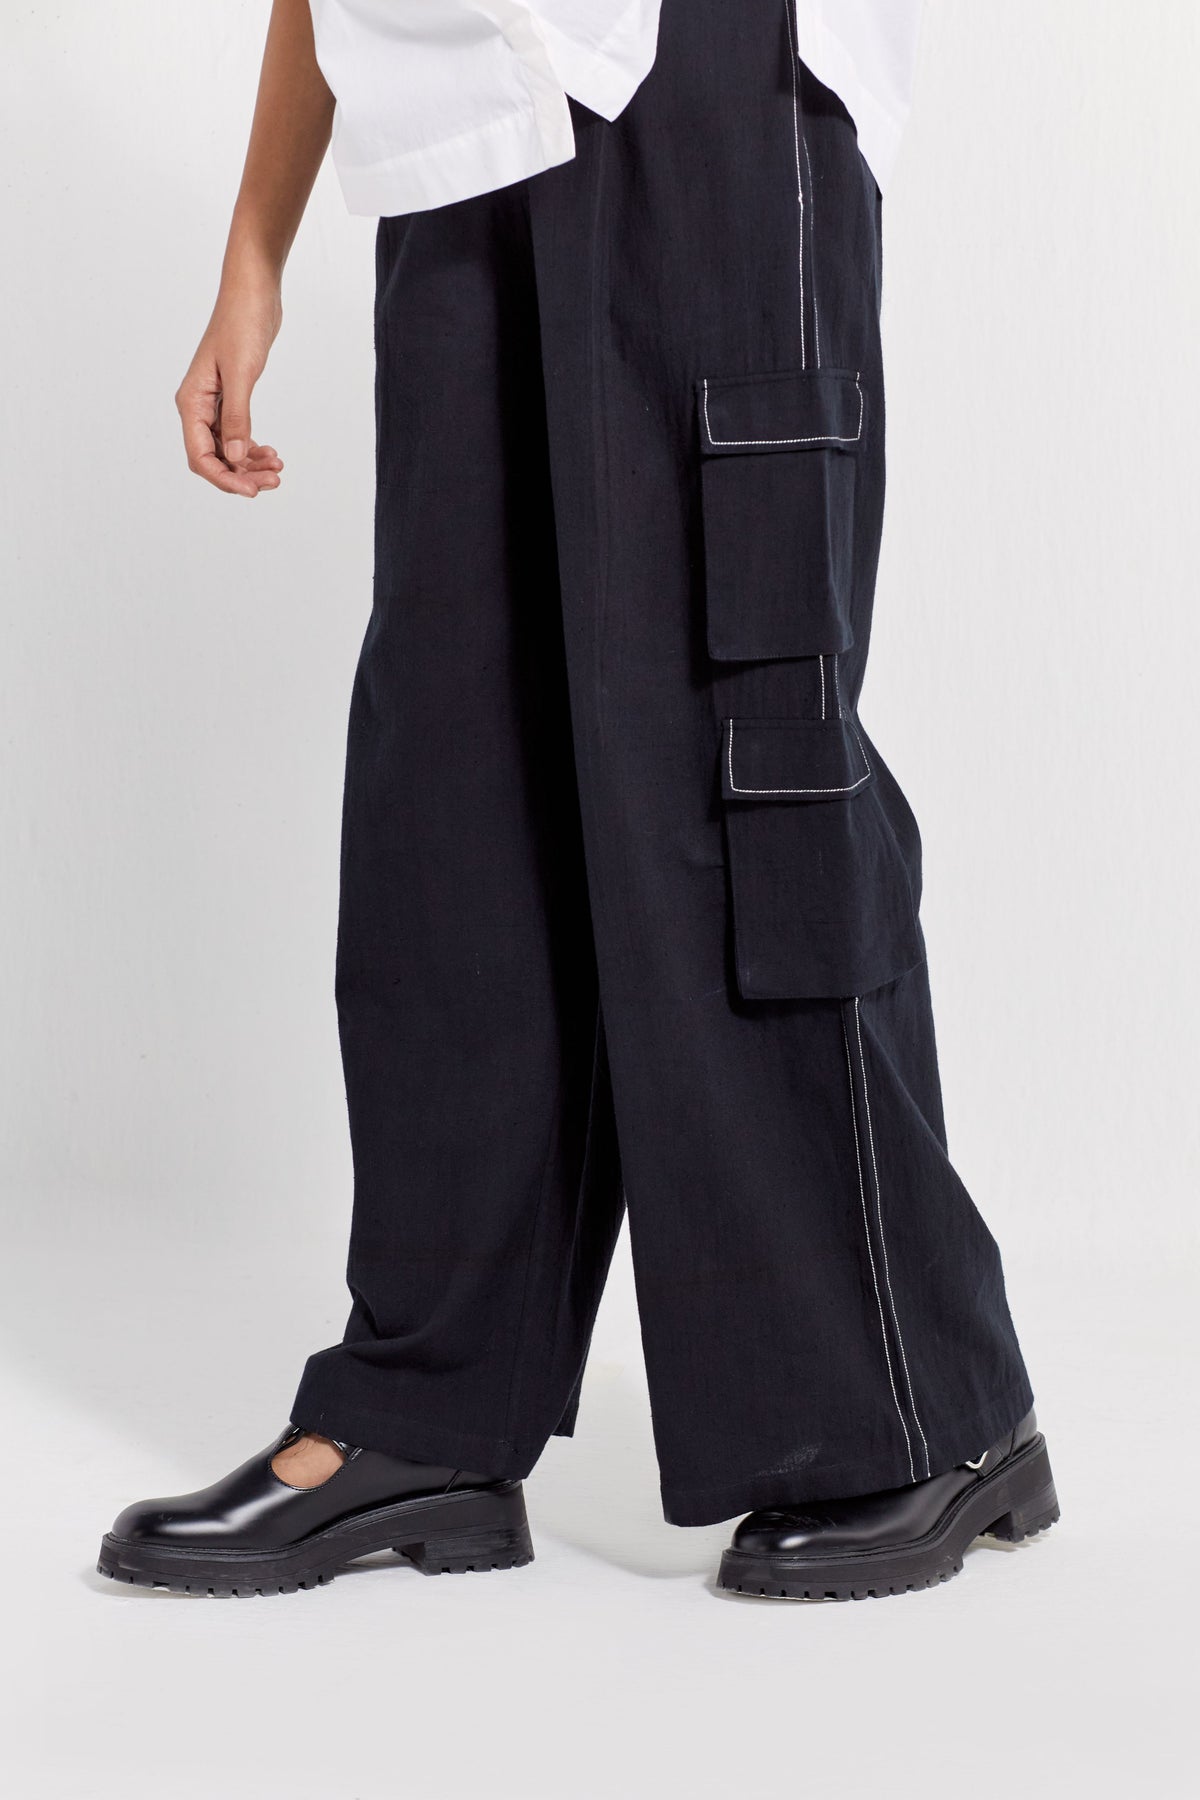 Anti-fit Shirt Co-ord